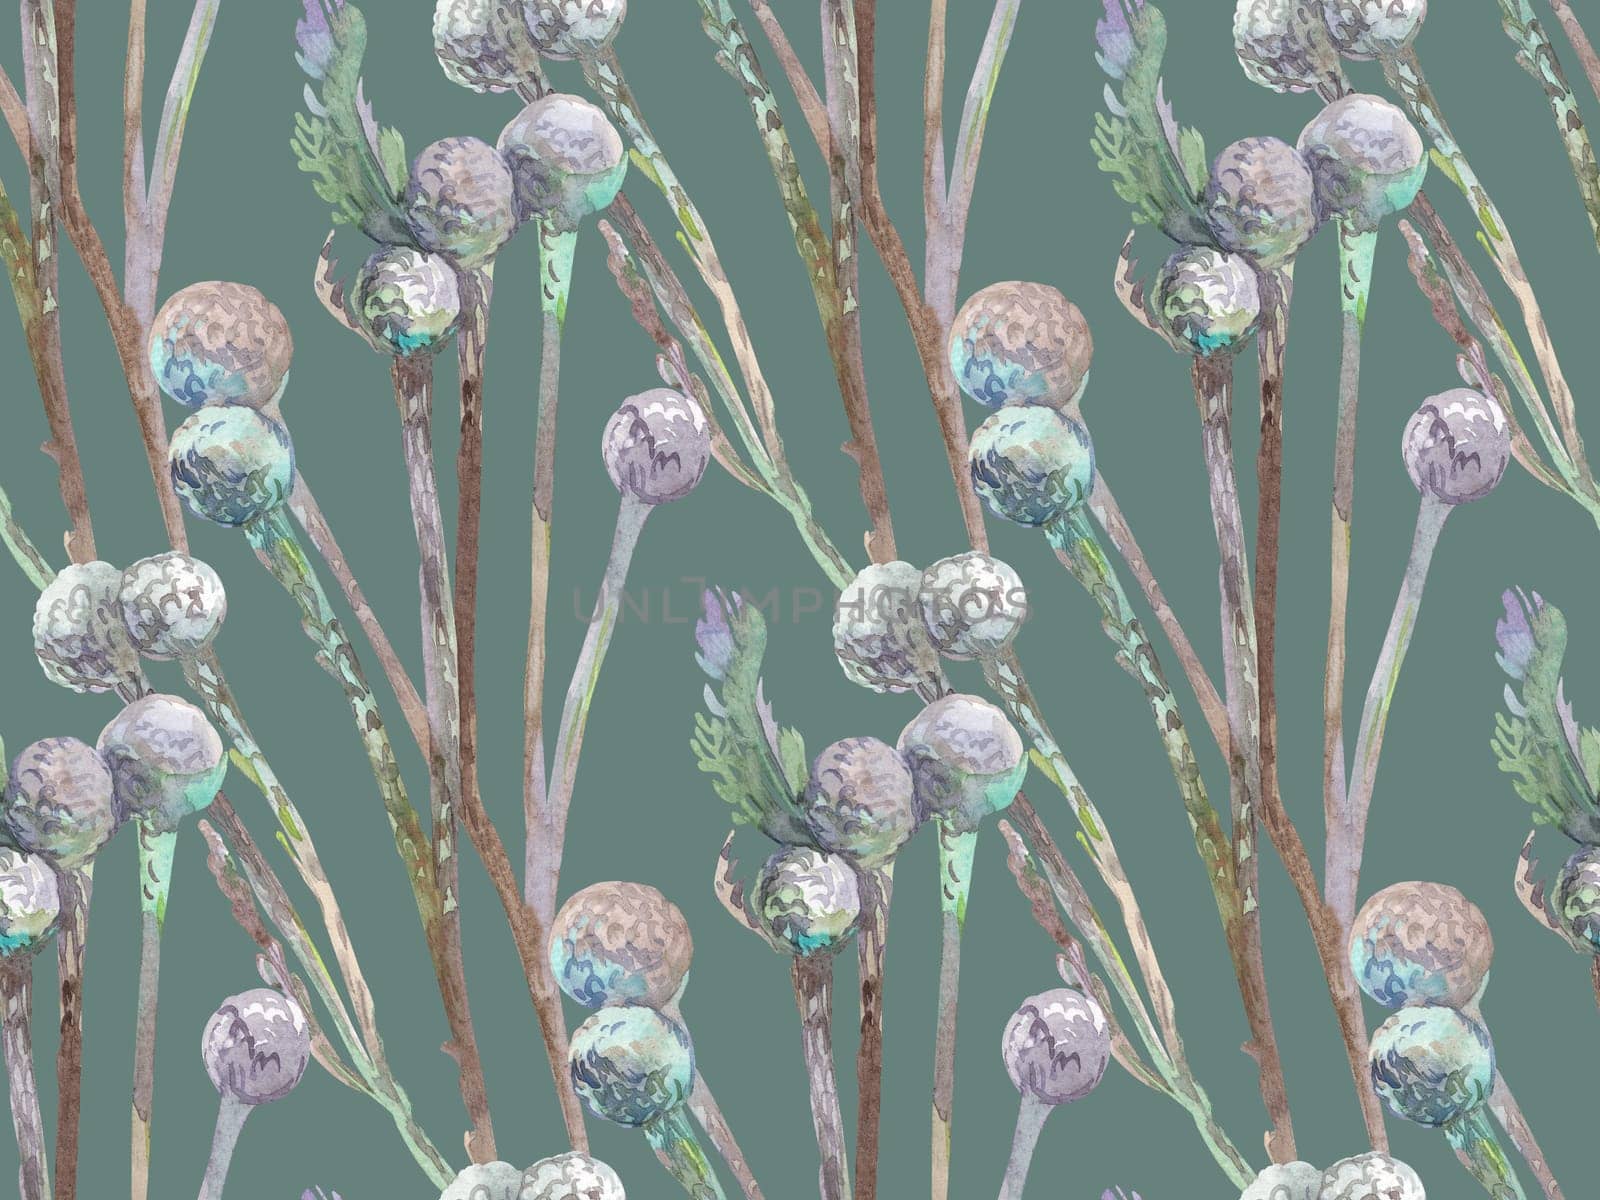 watercolor botanical pattern with gray dried brunei flowers on a green background by MarinaVoyush